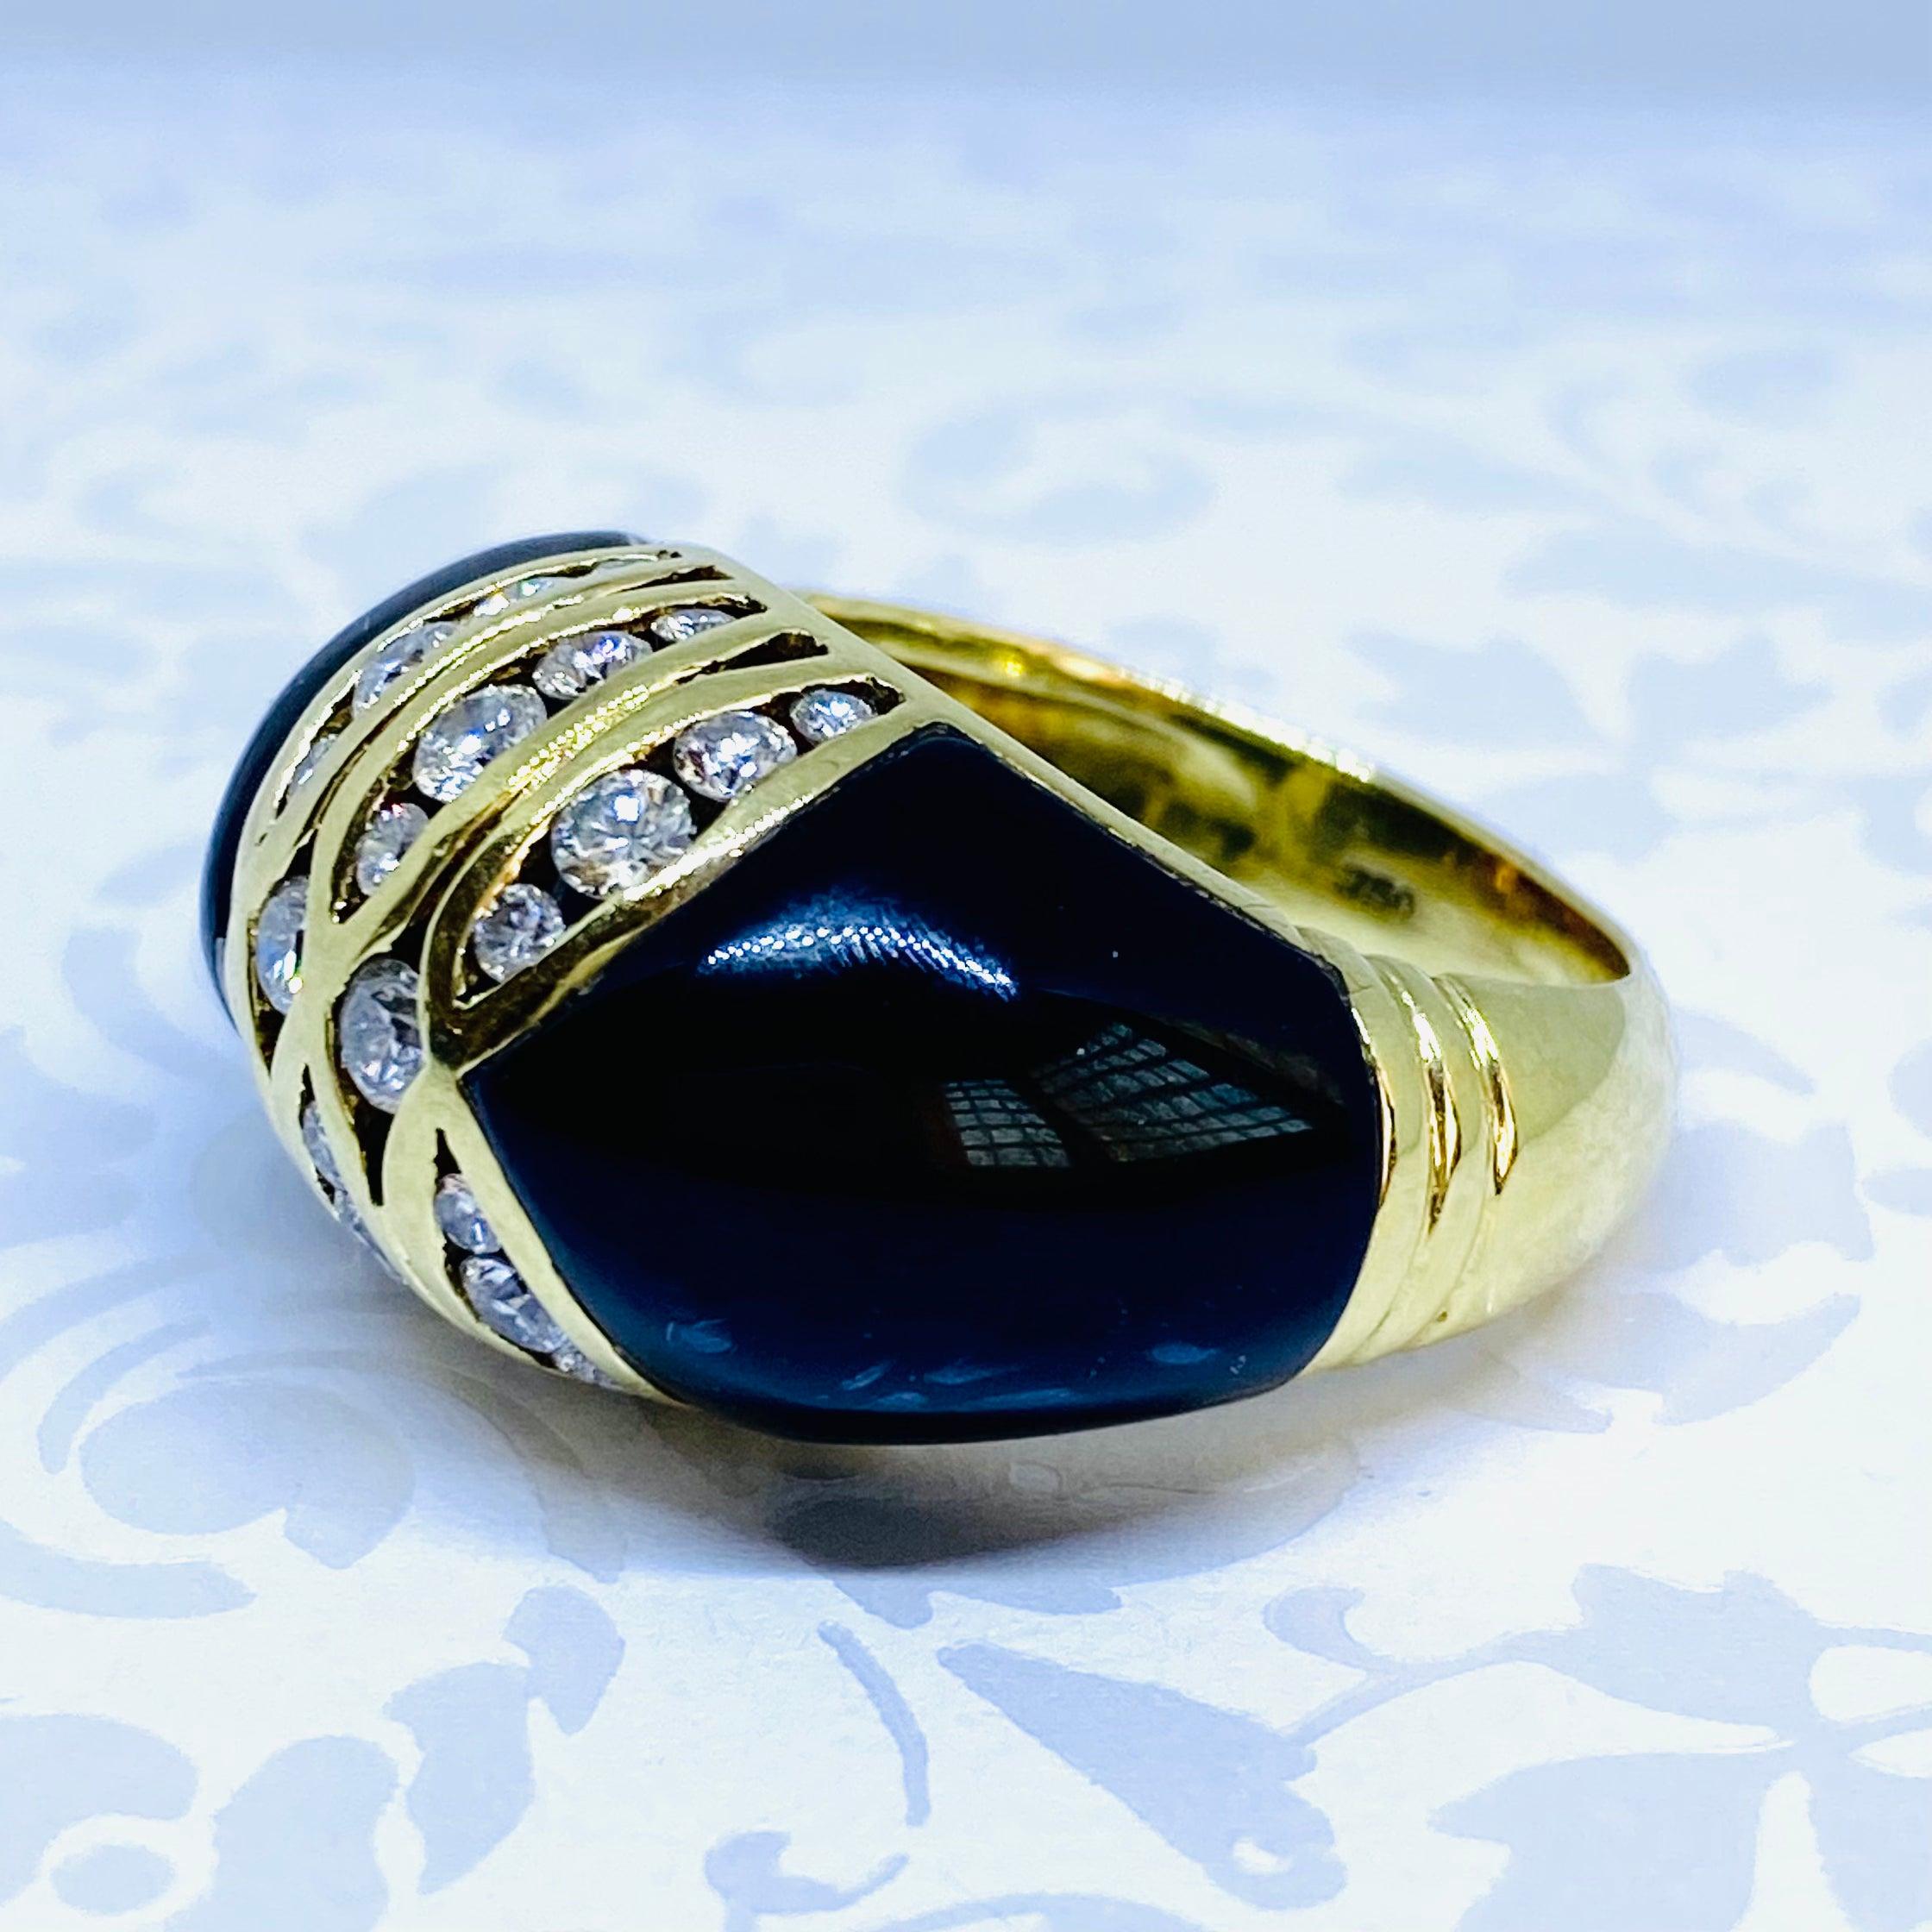 Crafted in 18K yellow gold, the ring features a dome design with channel set diamonds in the center, supported by custom cut black onyx shoulders.
26 round brilliant cut diamonds: 1.00ctw. Color: G-H, Clarity: VS1-VS2
Measurements:
Front: 14 mm H x